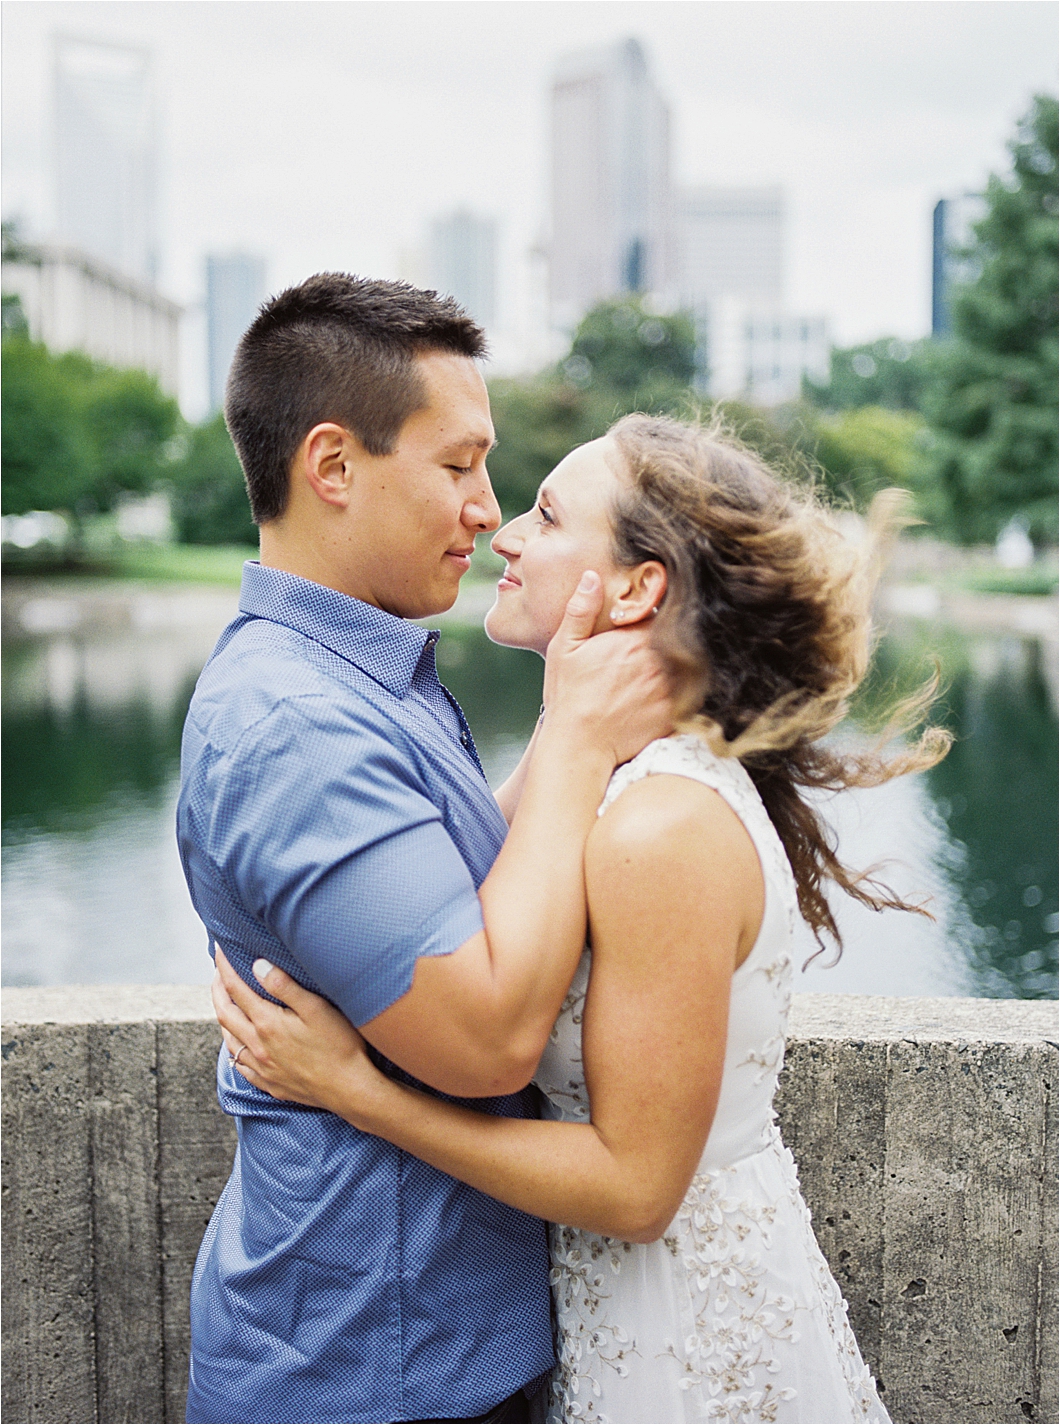 Downtown Charlotte Marshall Park Engagement Photos by Hillary Muelleck